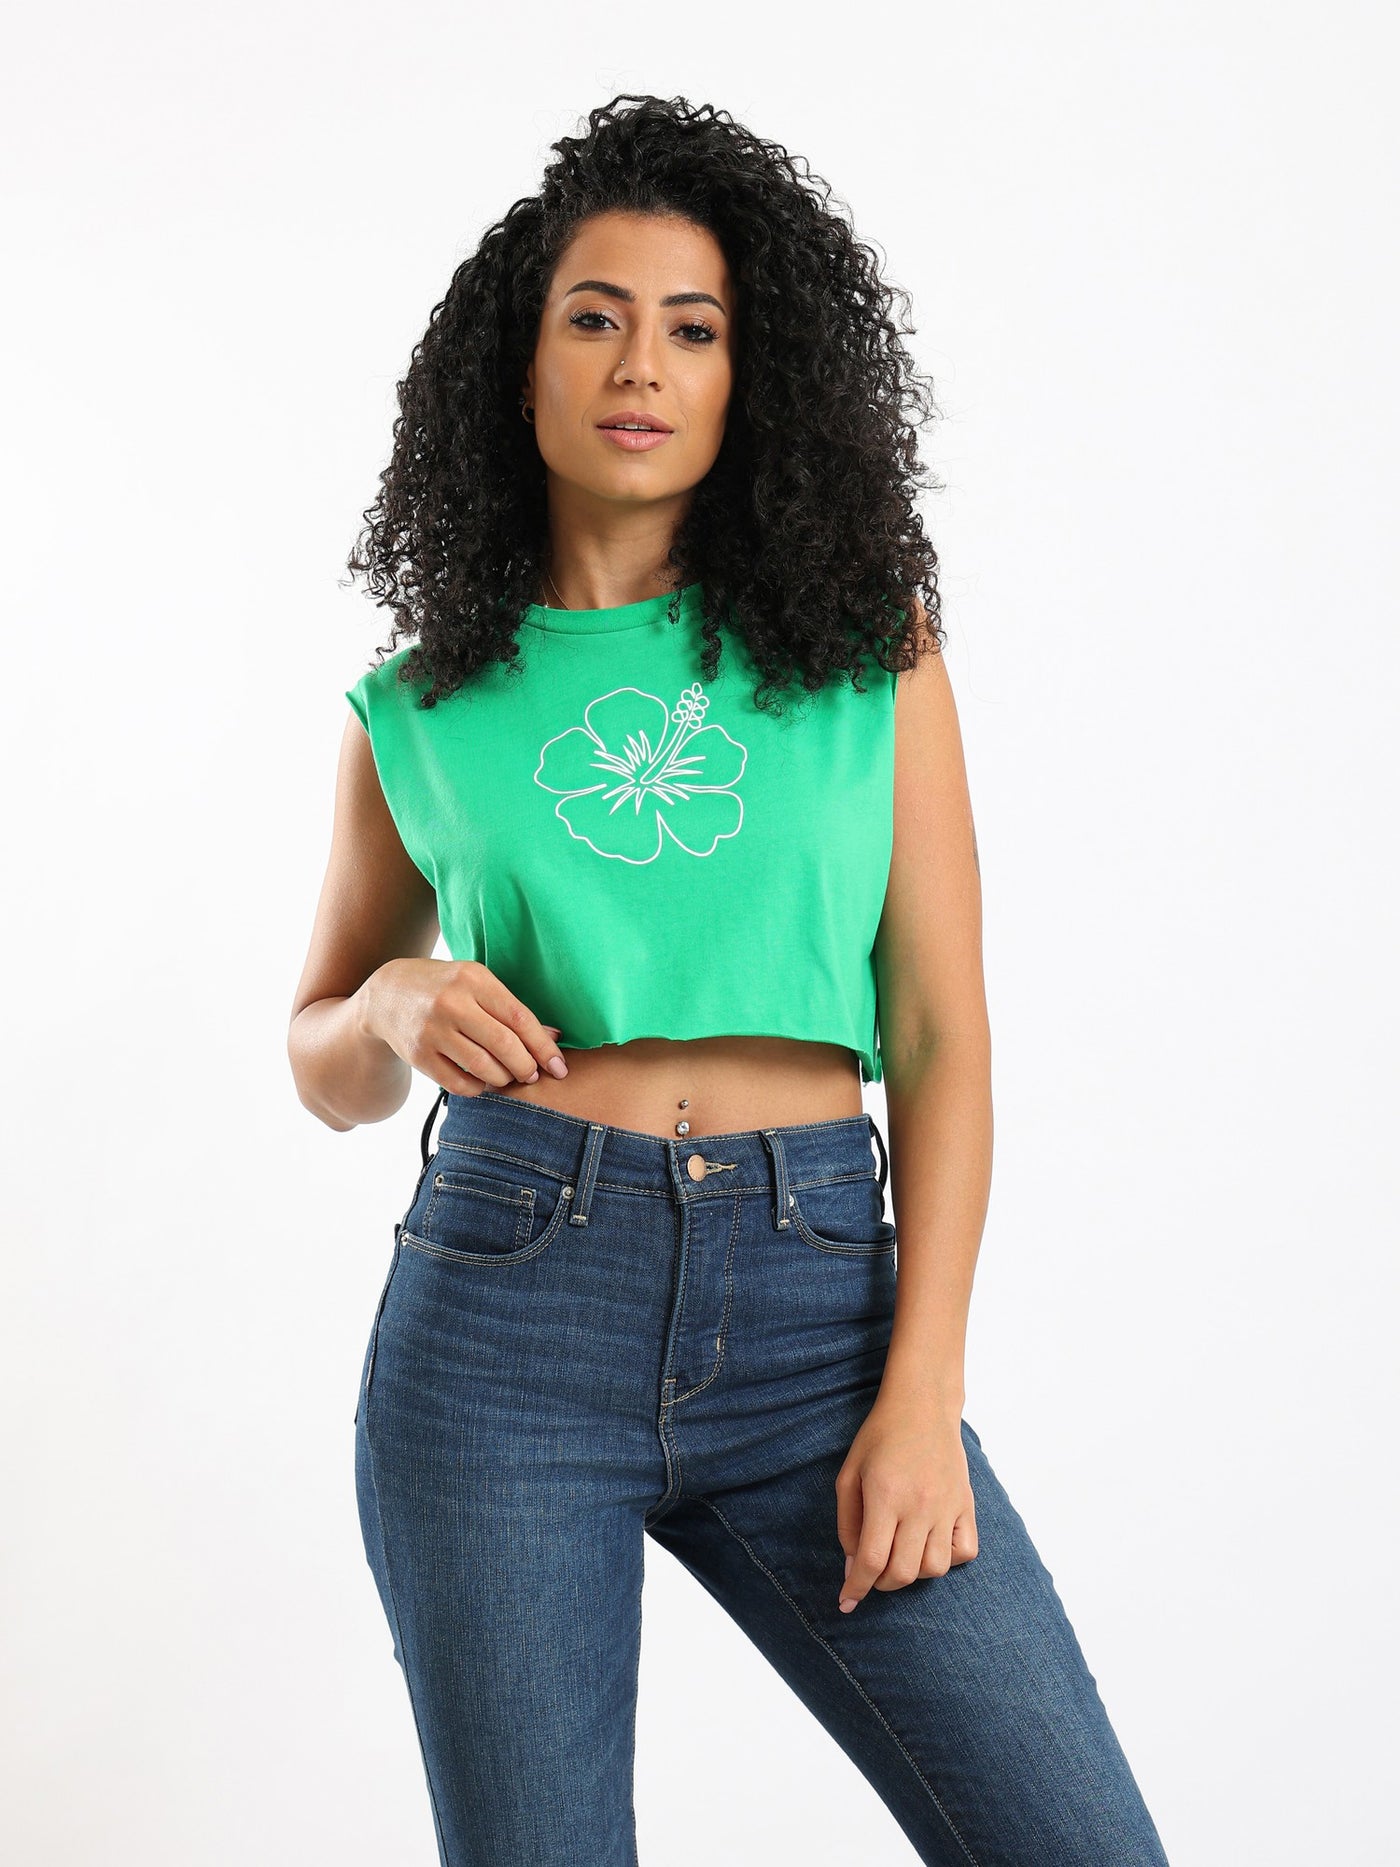 Cropped Top - Crew Neck - Front Print